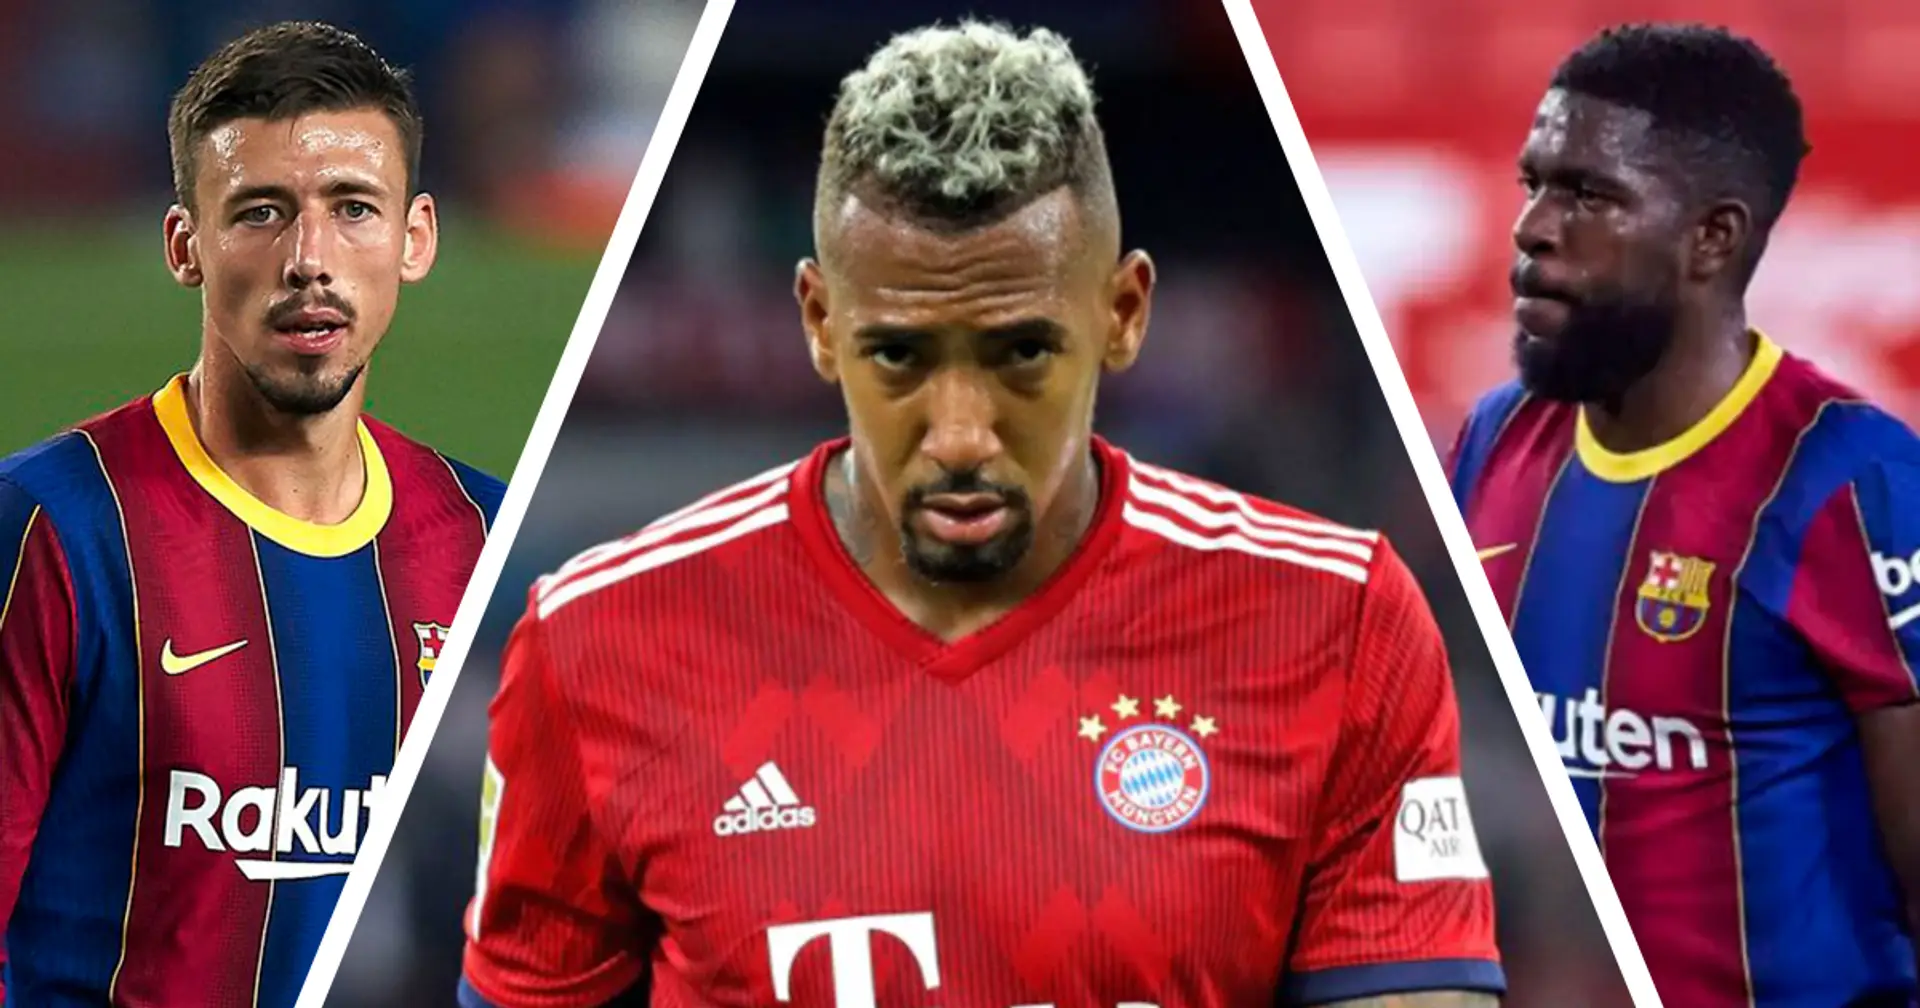 Why do we consider signing Boateng? Barca's centre-back situation explained in 1-minute read